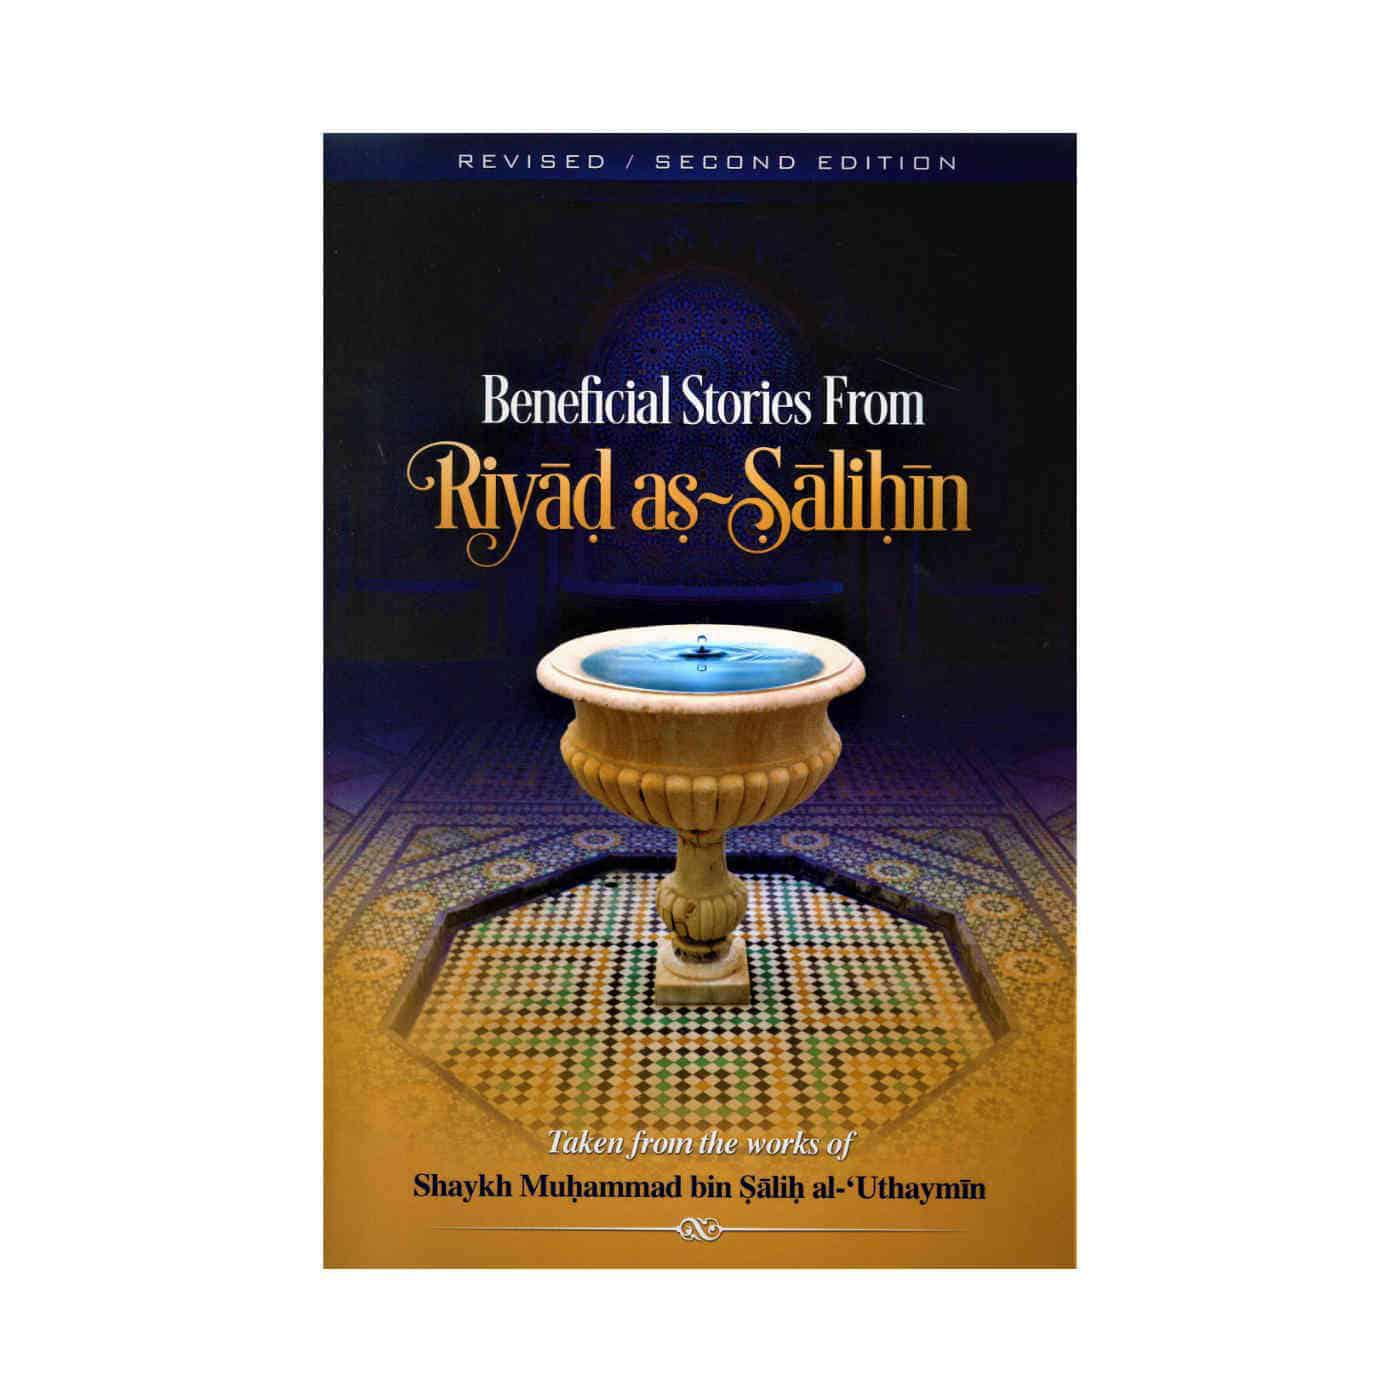 Beneficial Stories From Riyad as-Salihin (Revised Second Edition)